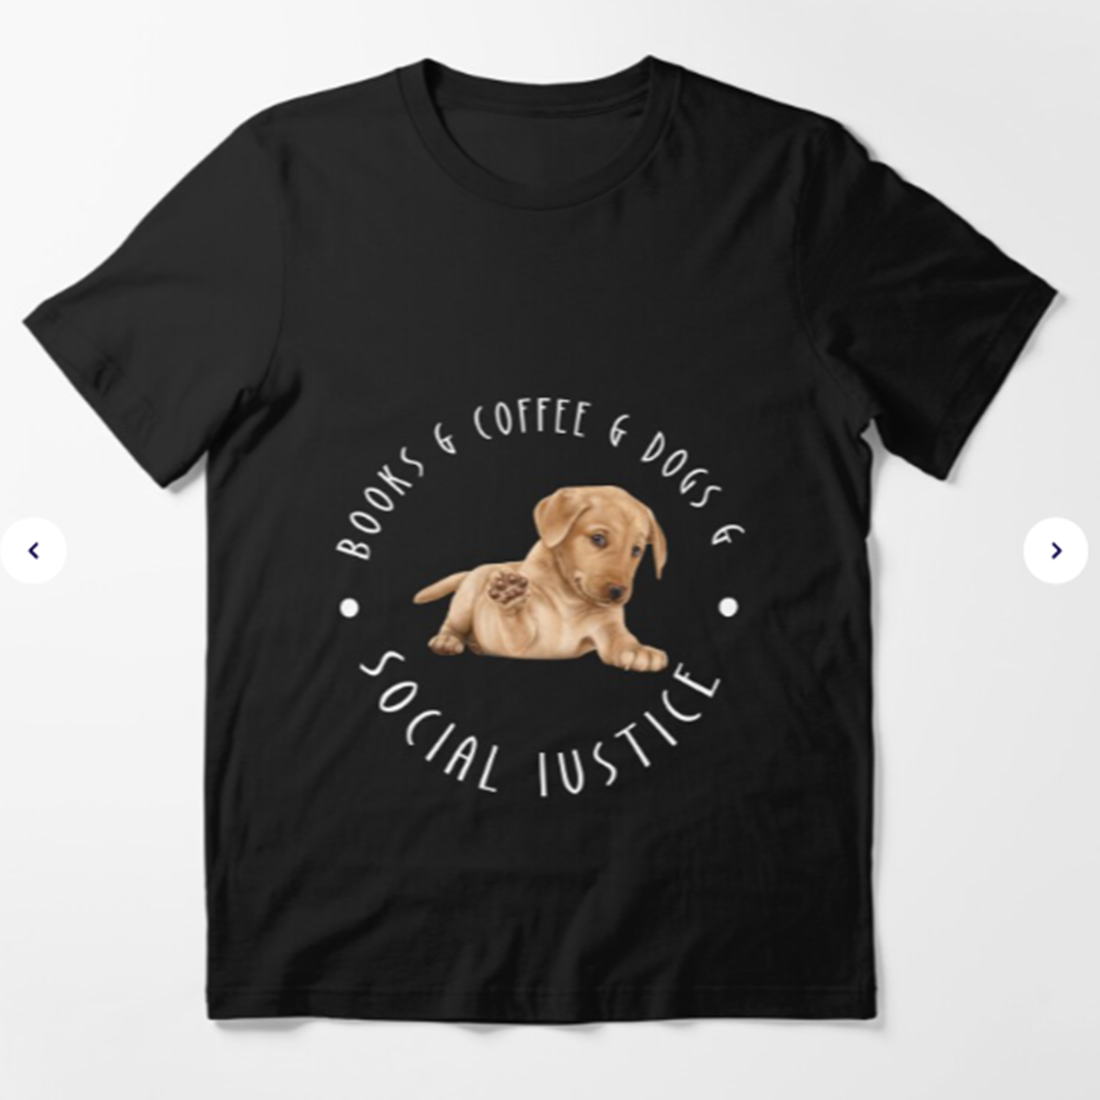 BOOKS & COFFEE & DOGS & SOCIAL JUSTICE Pullover Sweatshirt preview image.